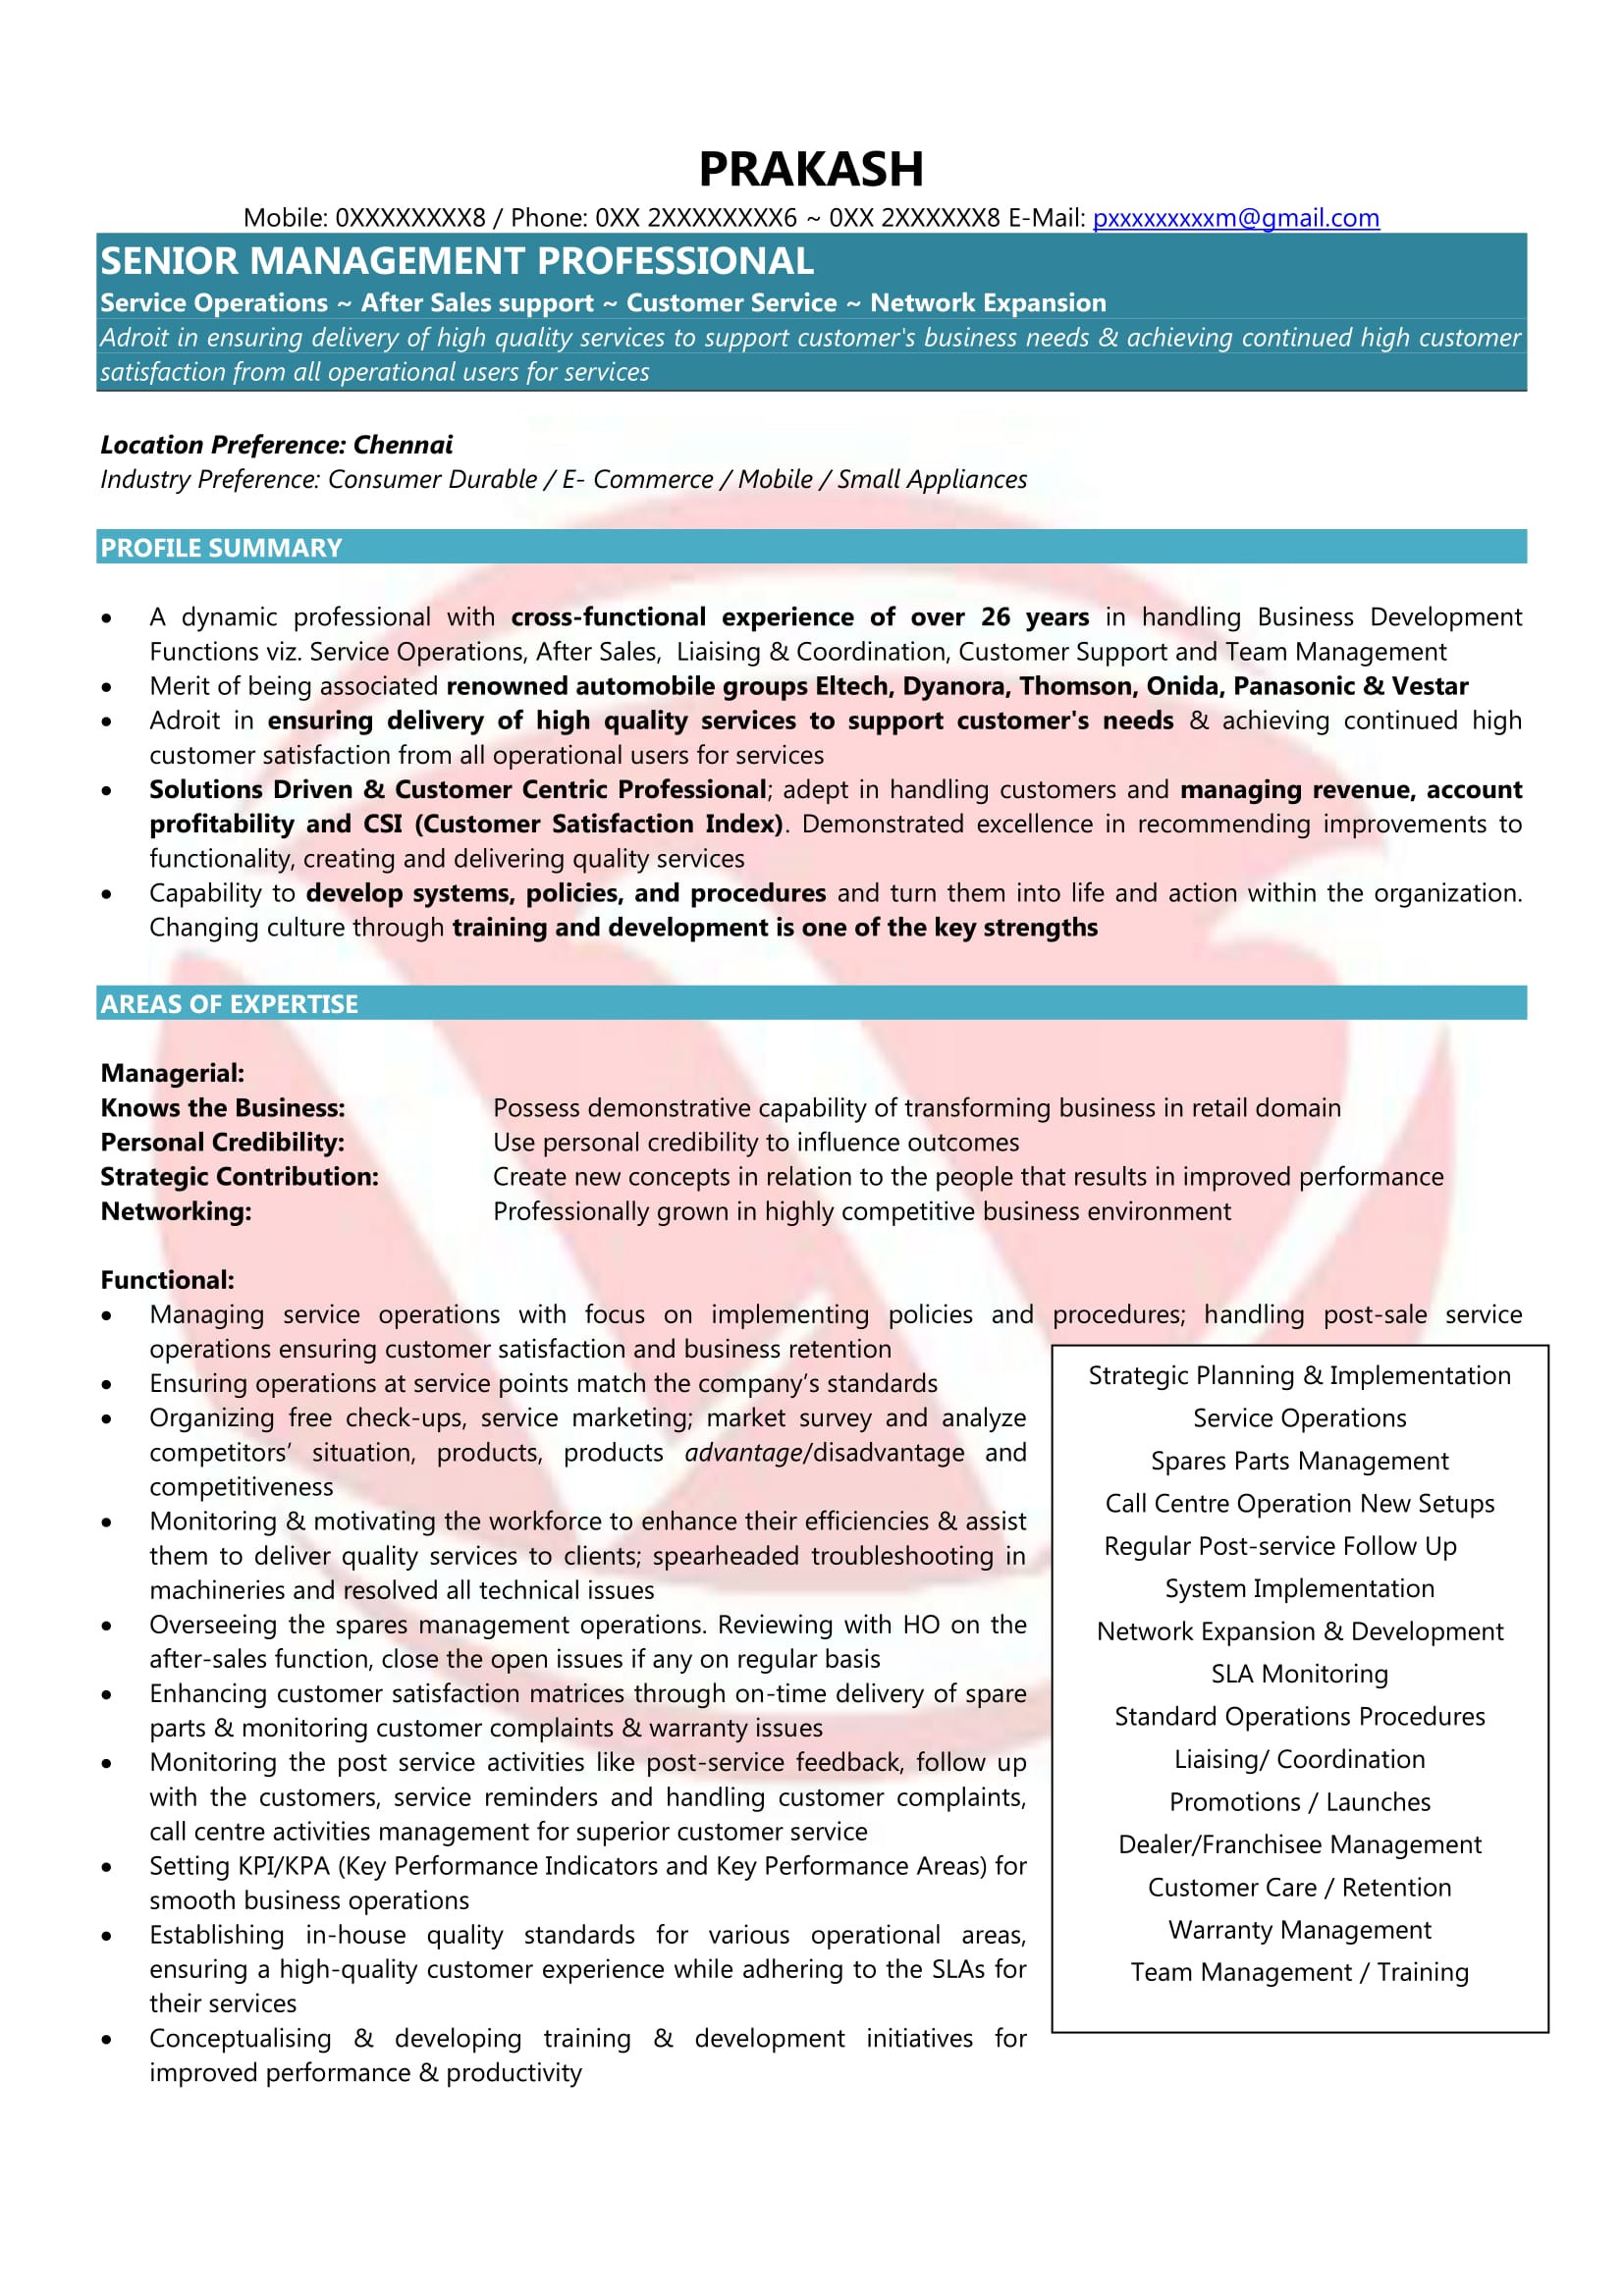 Sample Resume Of Customer Support Executive Customer Support Sample Resumes, Download Resume format Templates!